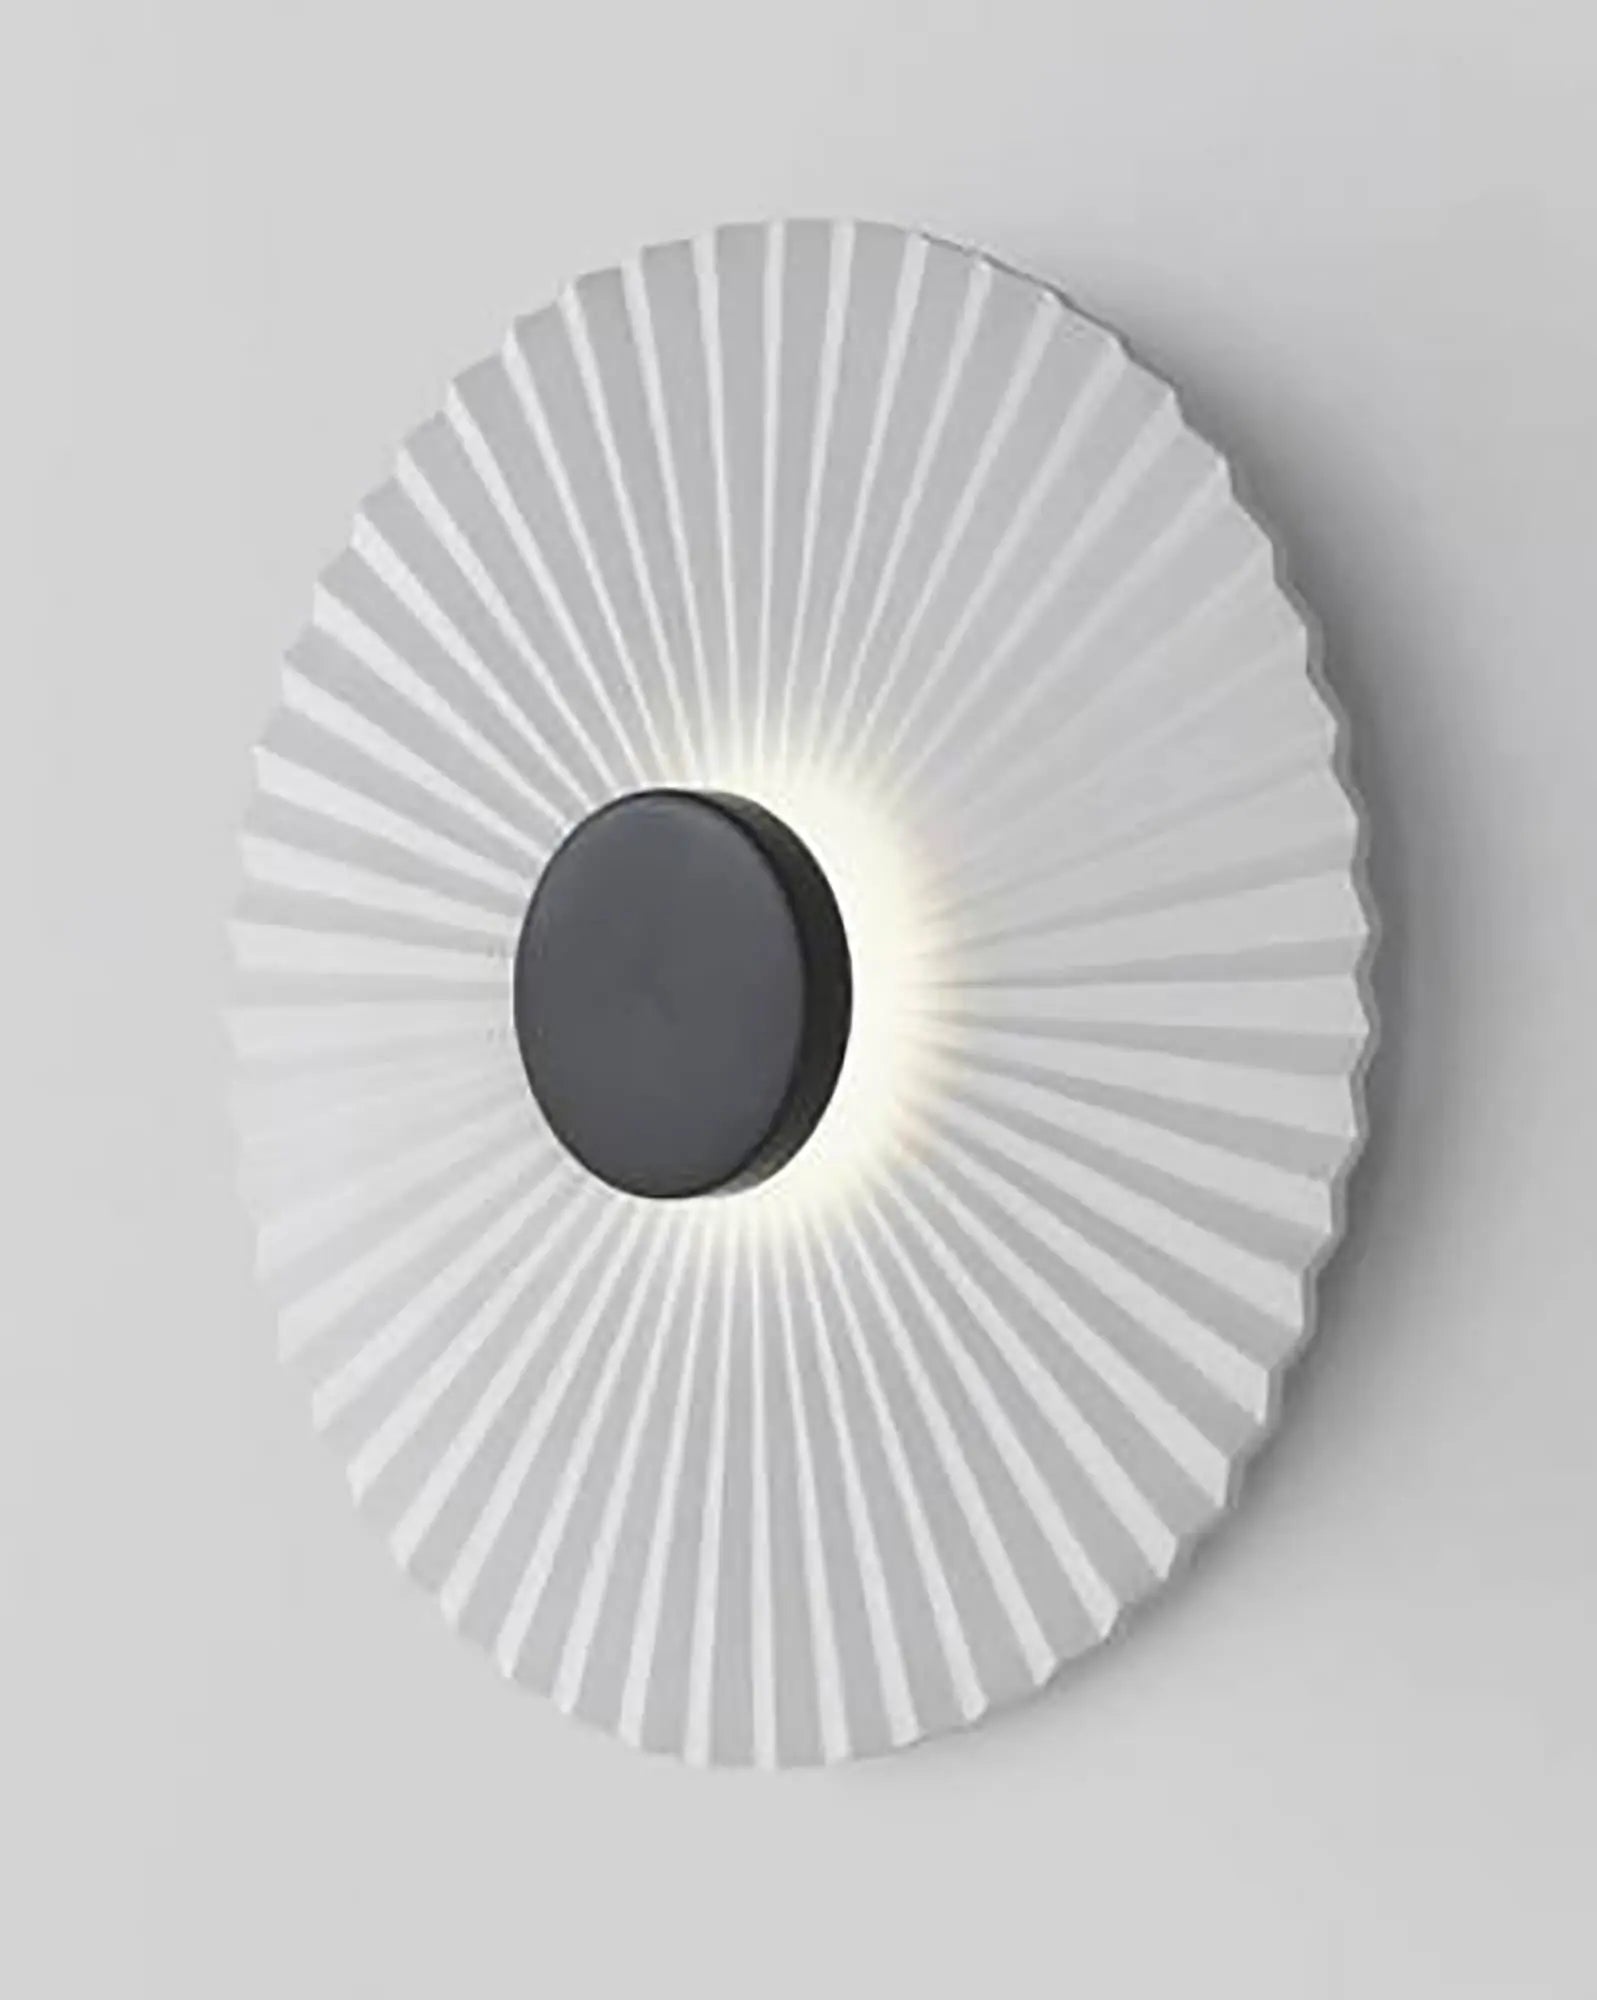 Osion contemporary wavy circular shade with metal detail wall light product photo